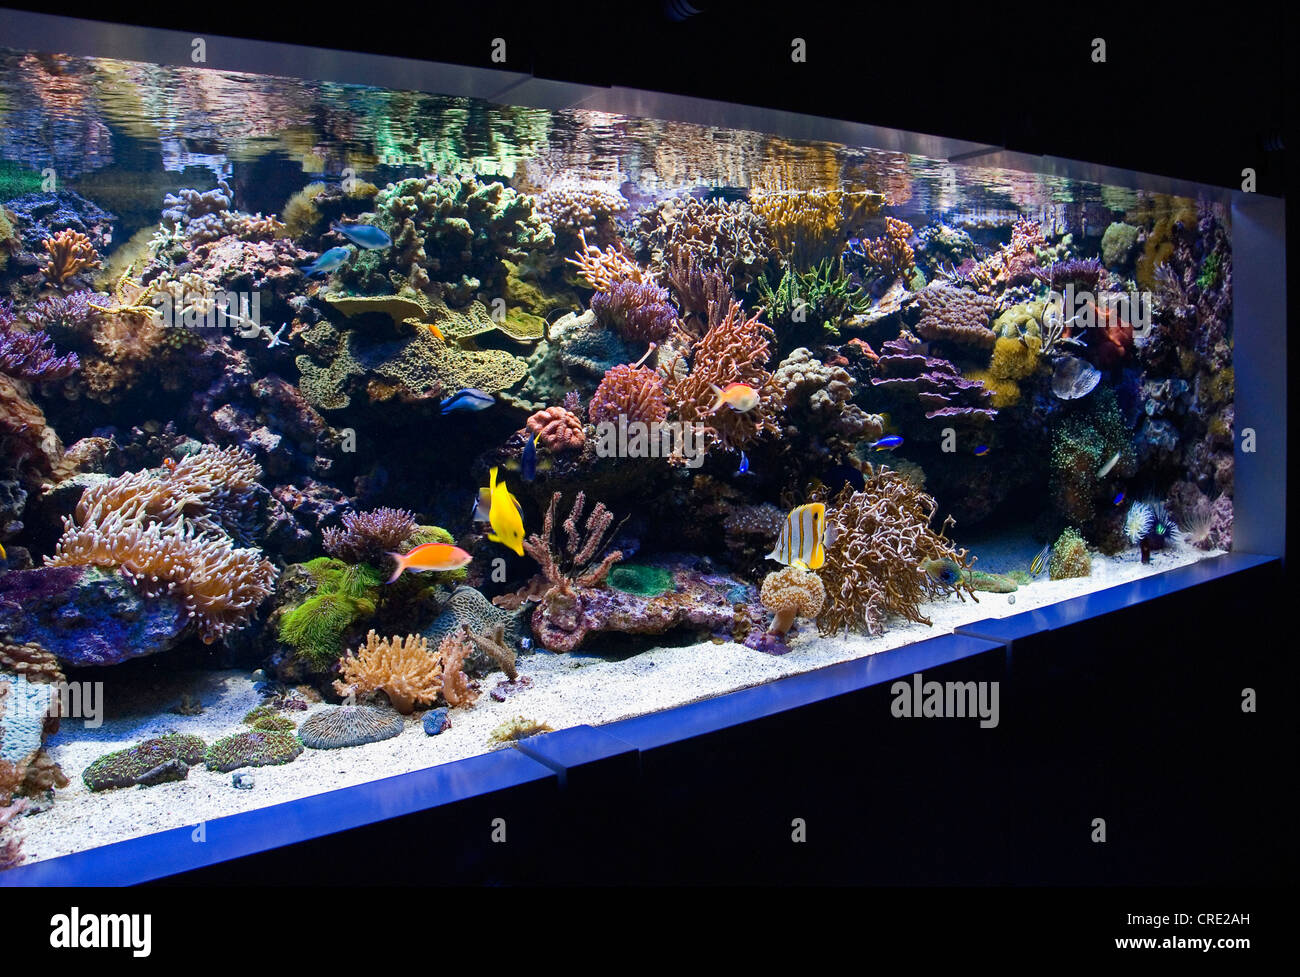 Tropical coral reef aquarium with small fishes, corals and other invertebrates, Portugal, Lisbon Stock Photo